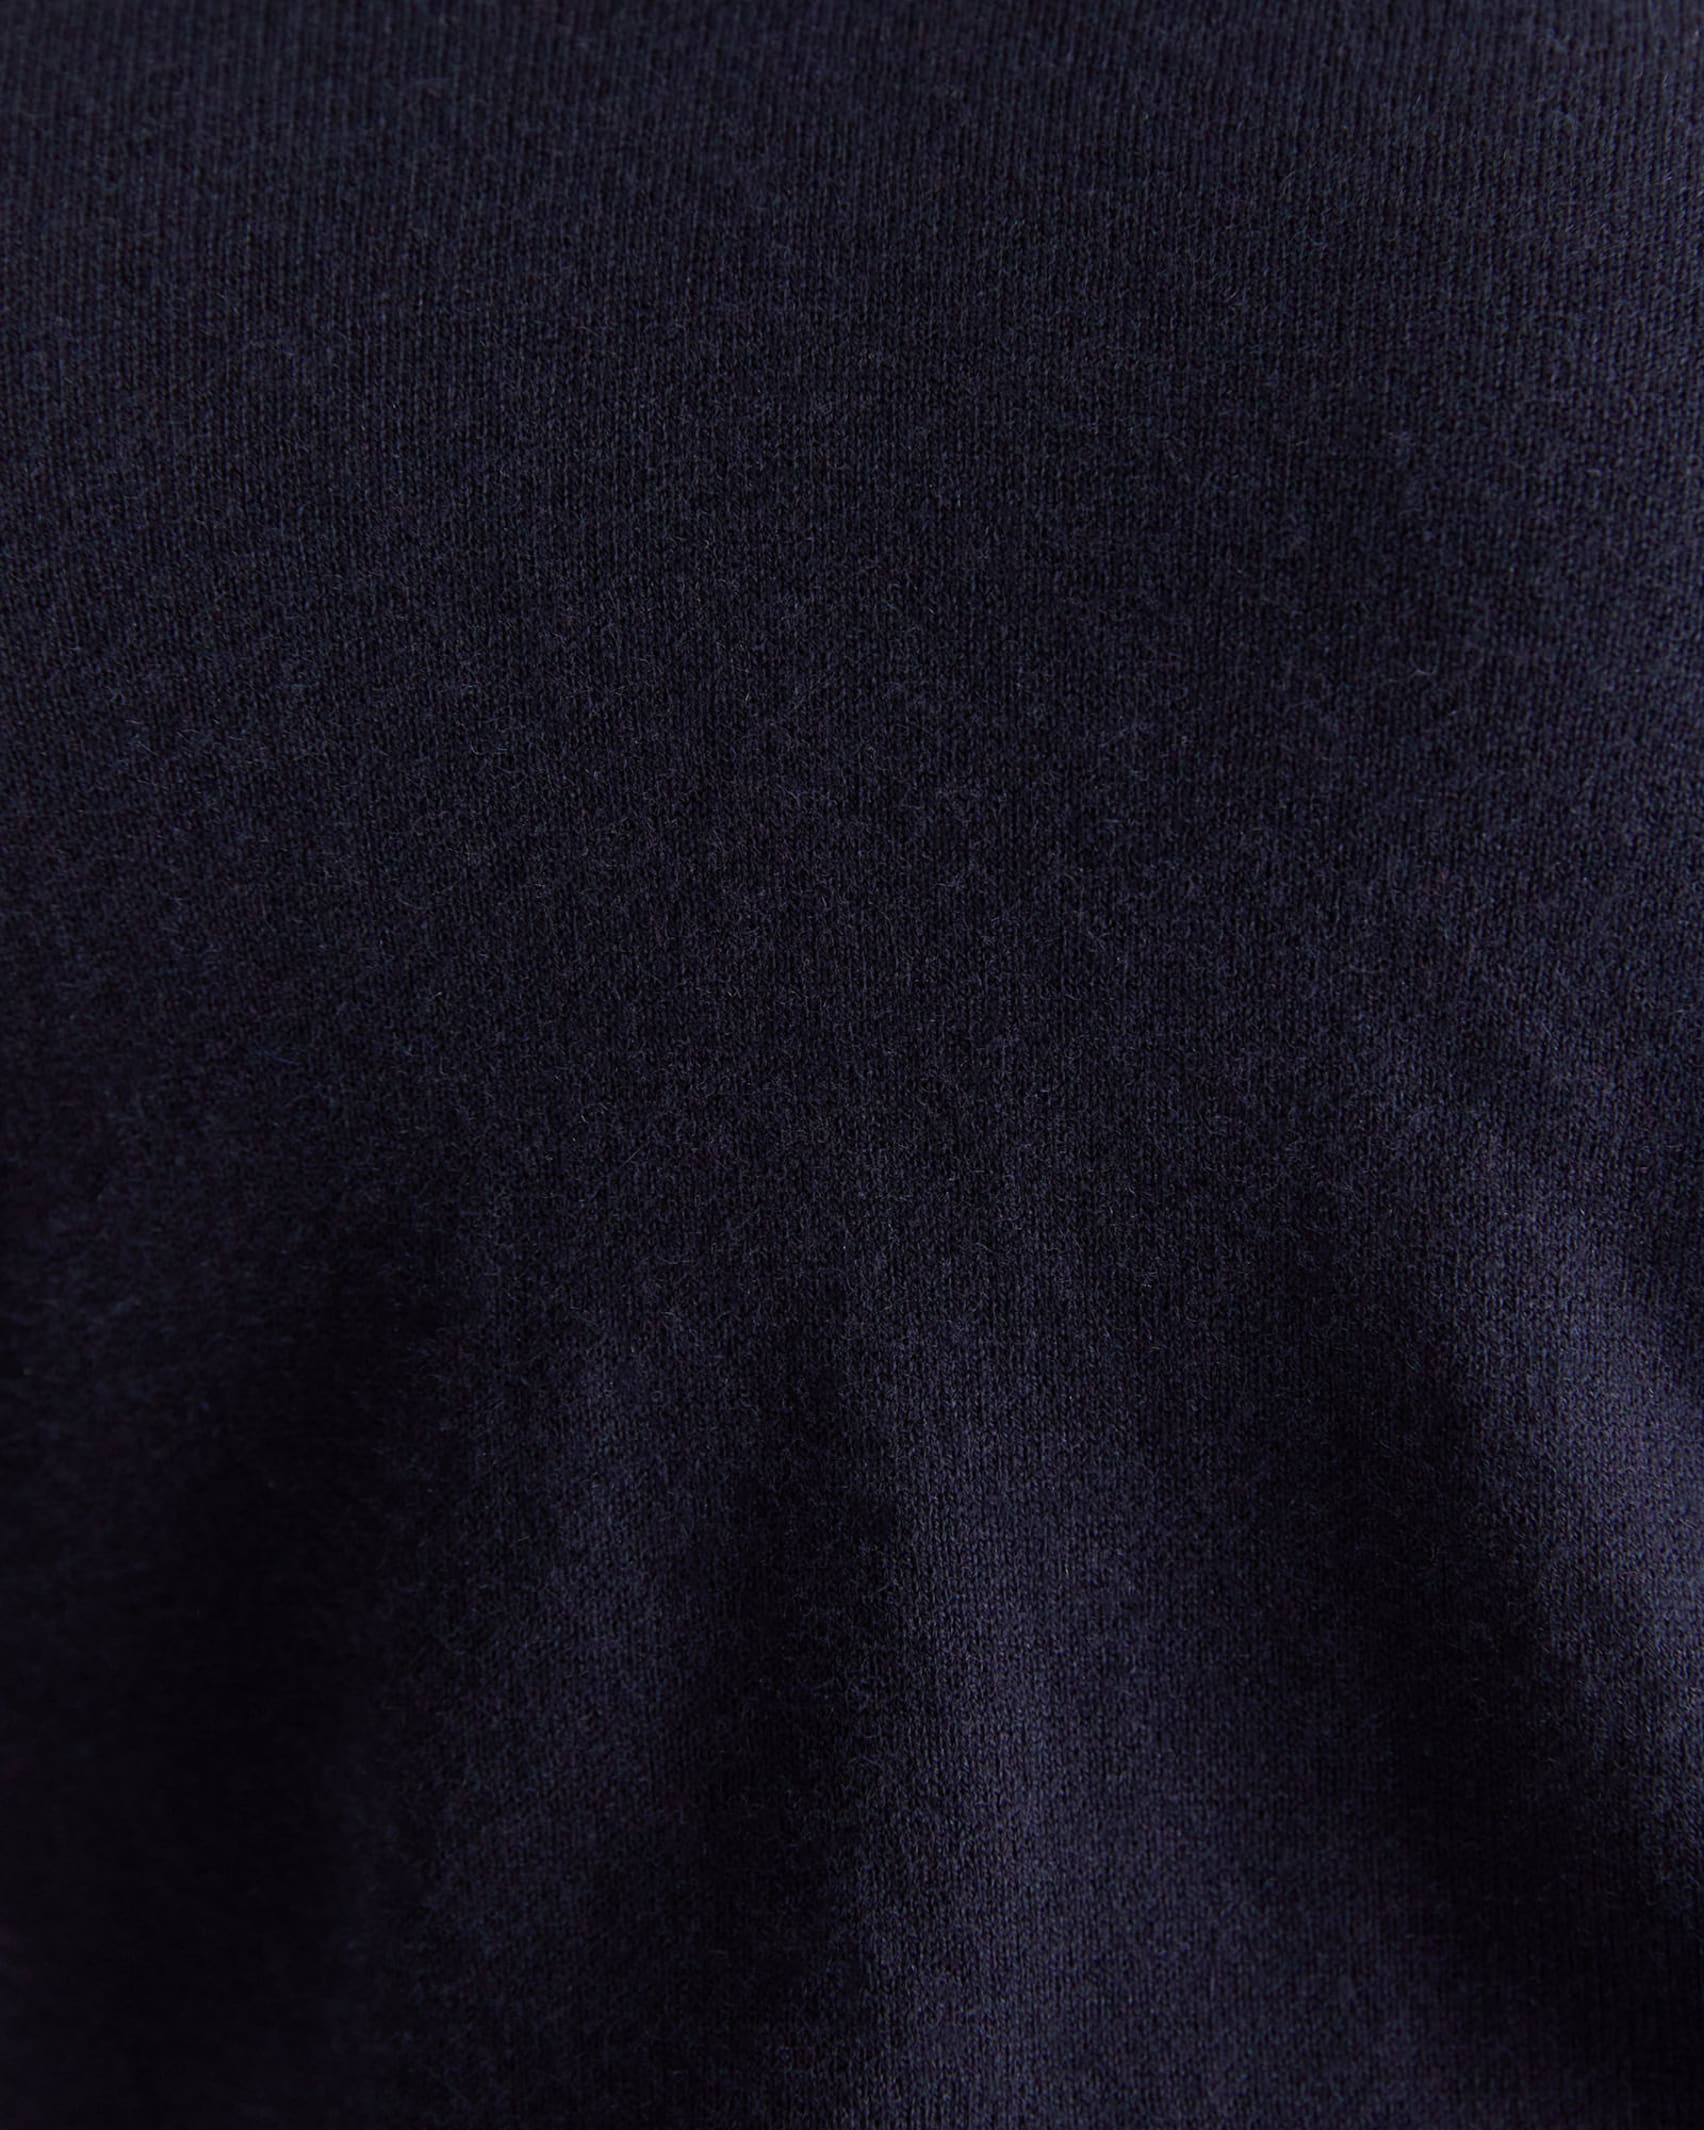 Laurina V-neck Sweater in NAVY